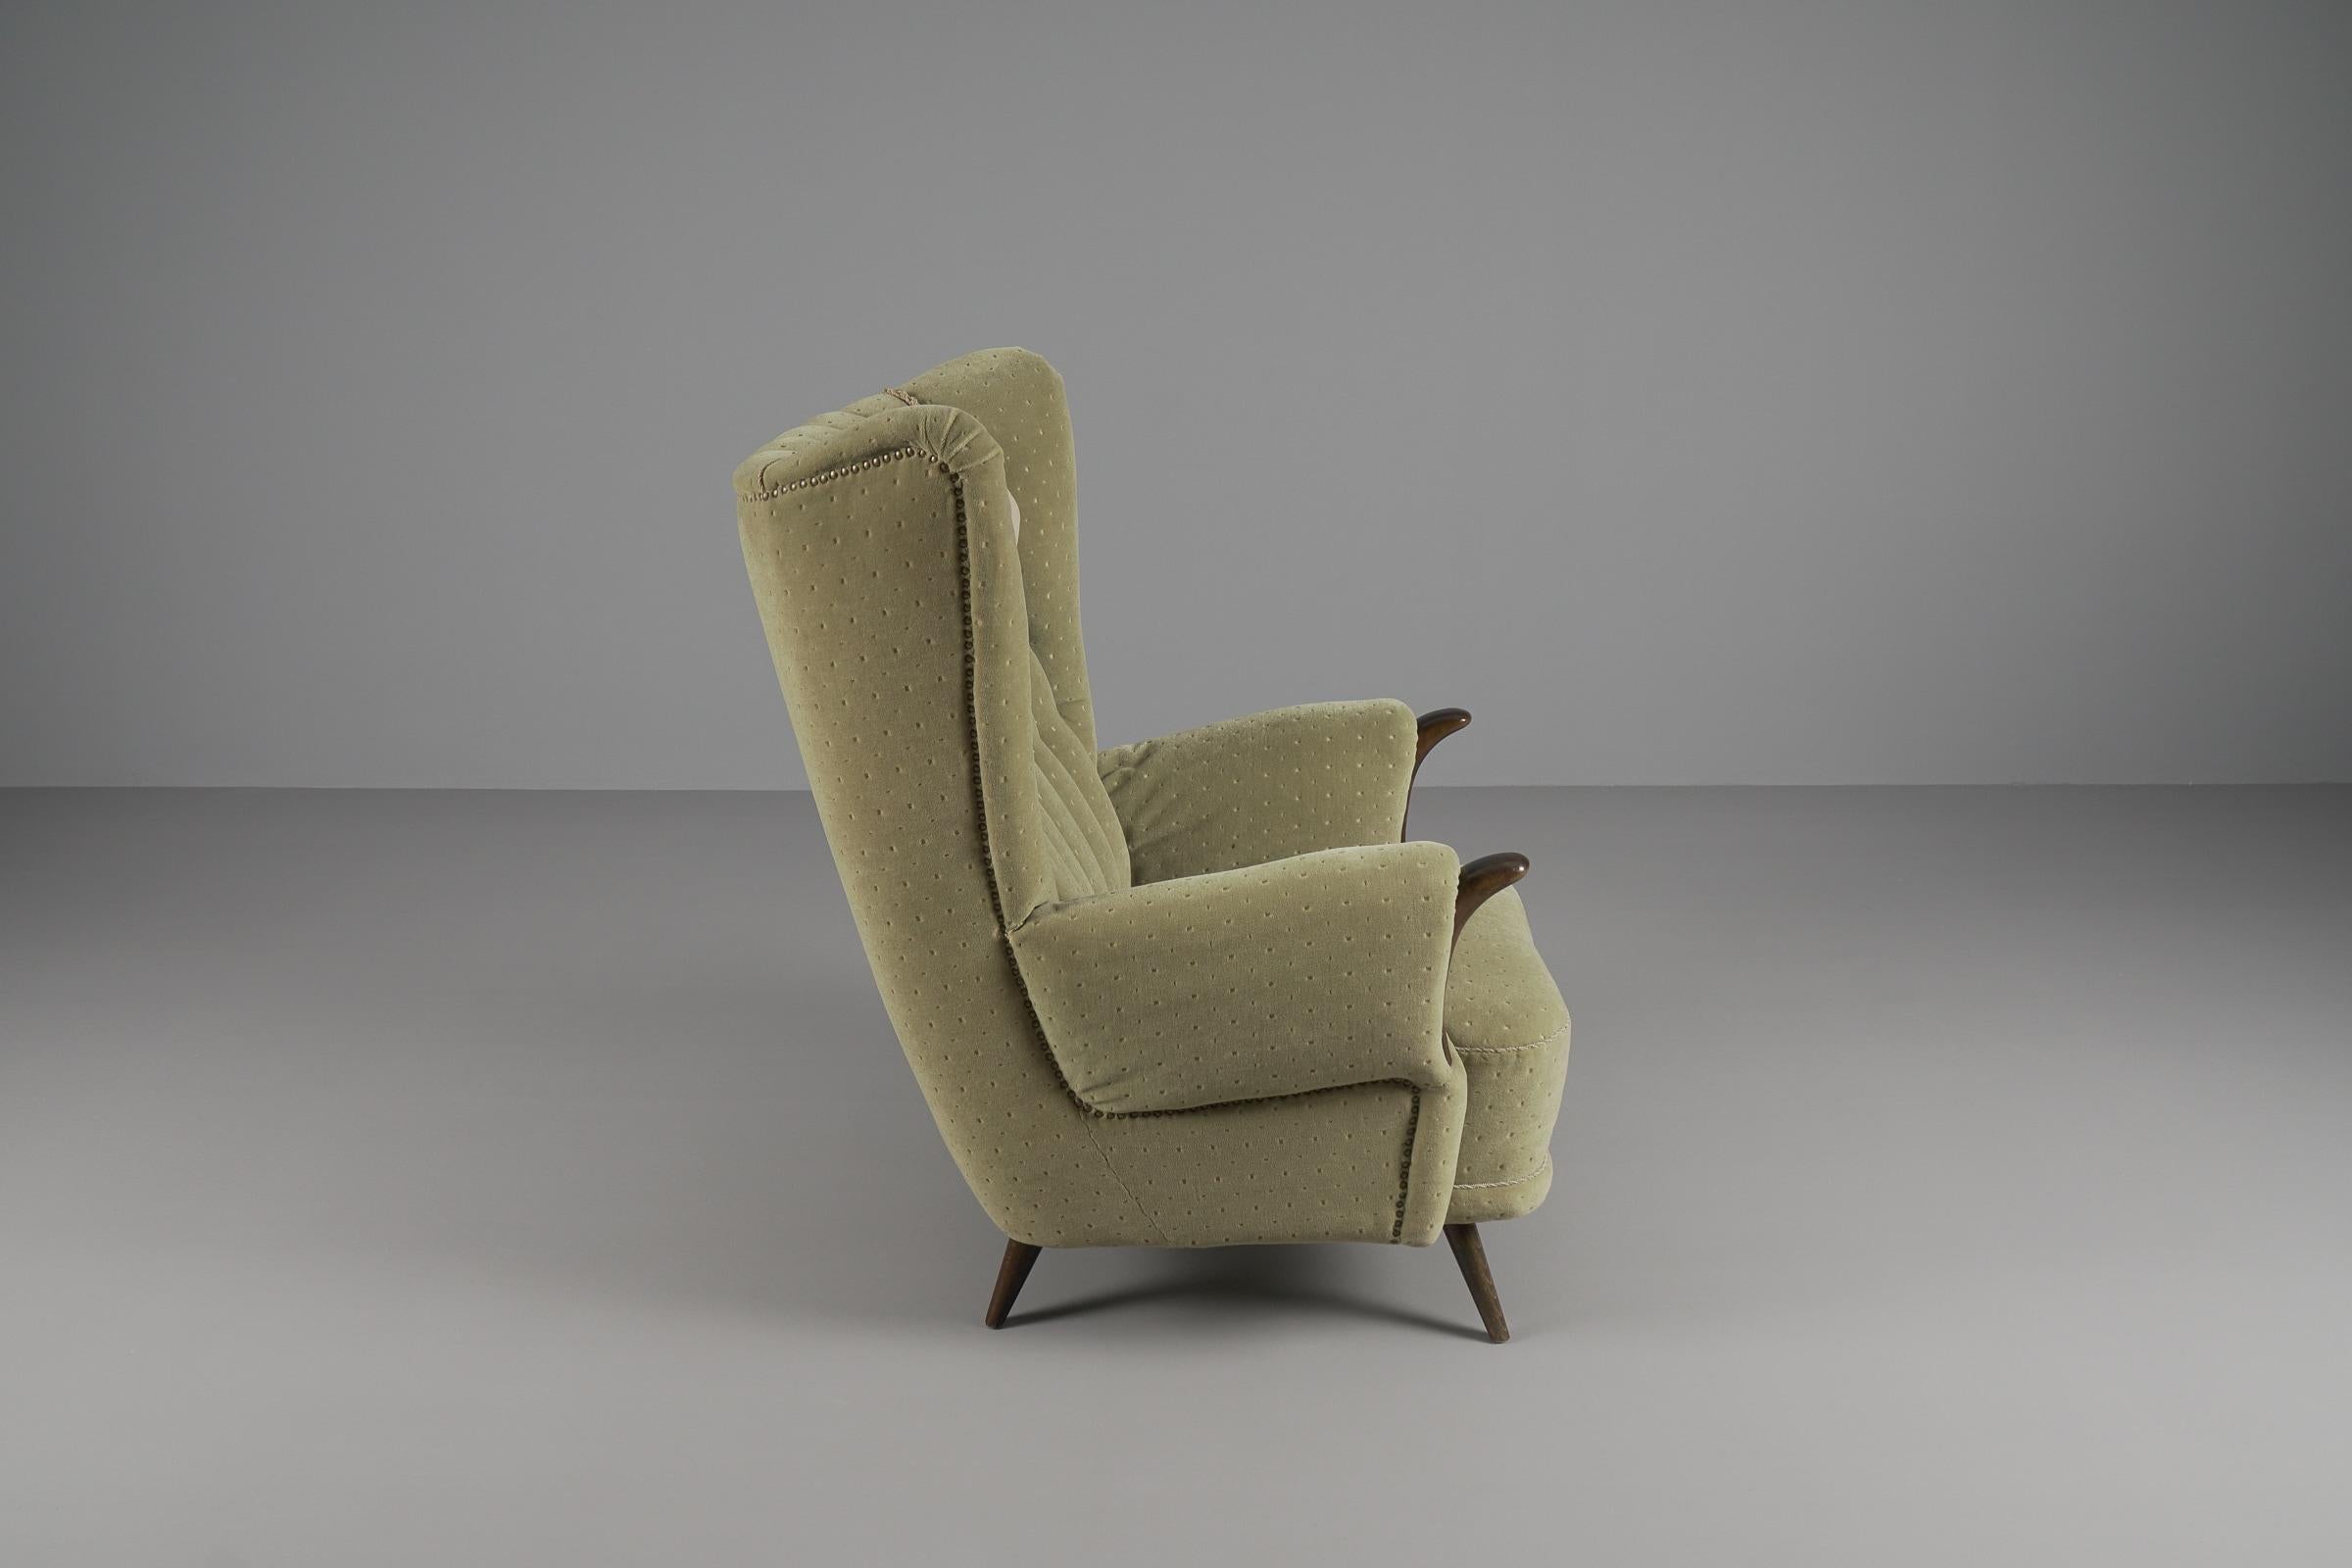 Large Green Italian Wood & Fabric Wingback Armchair, 1950s For Sale 1